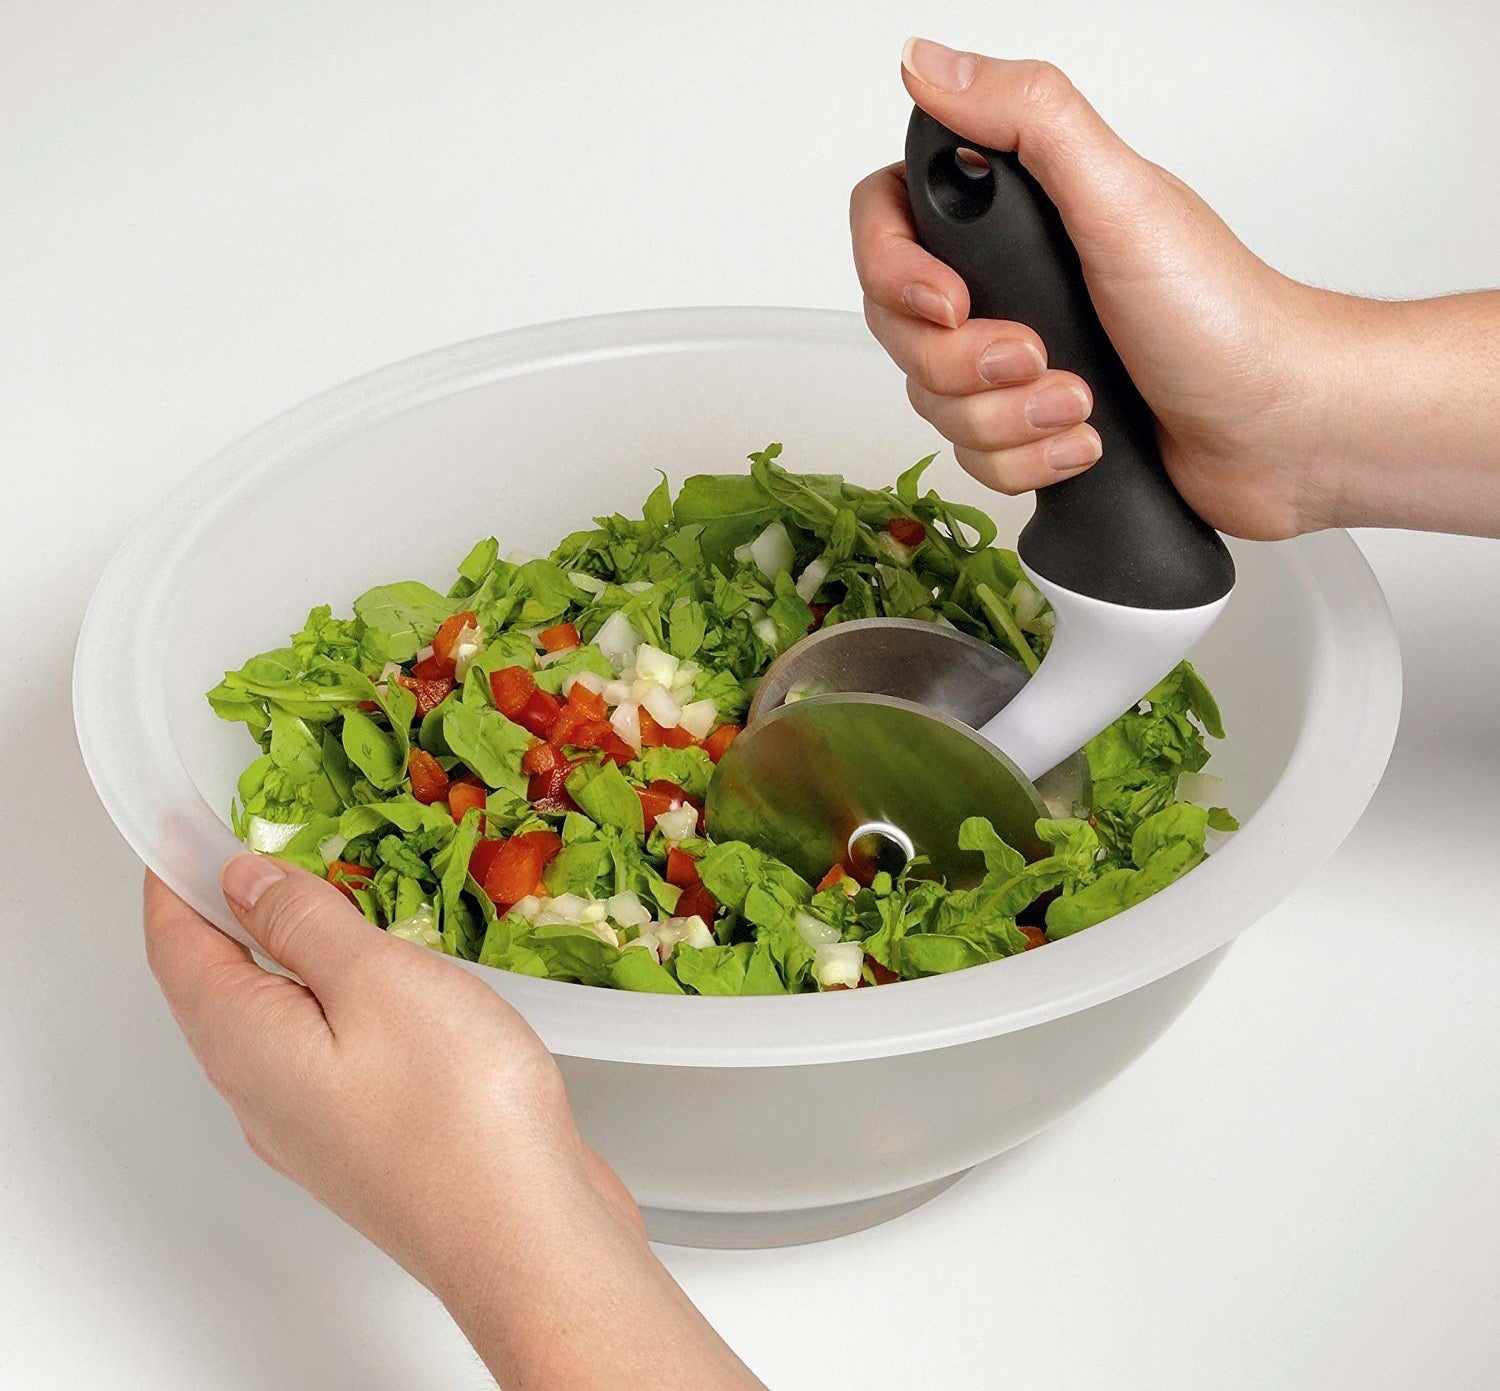 A person rolls the chopping tool in the bowl to prep salad